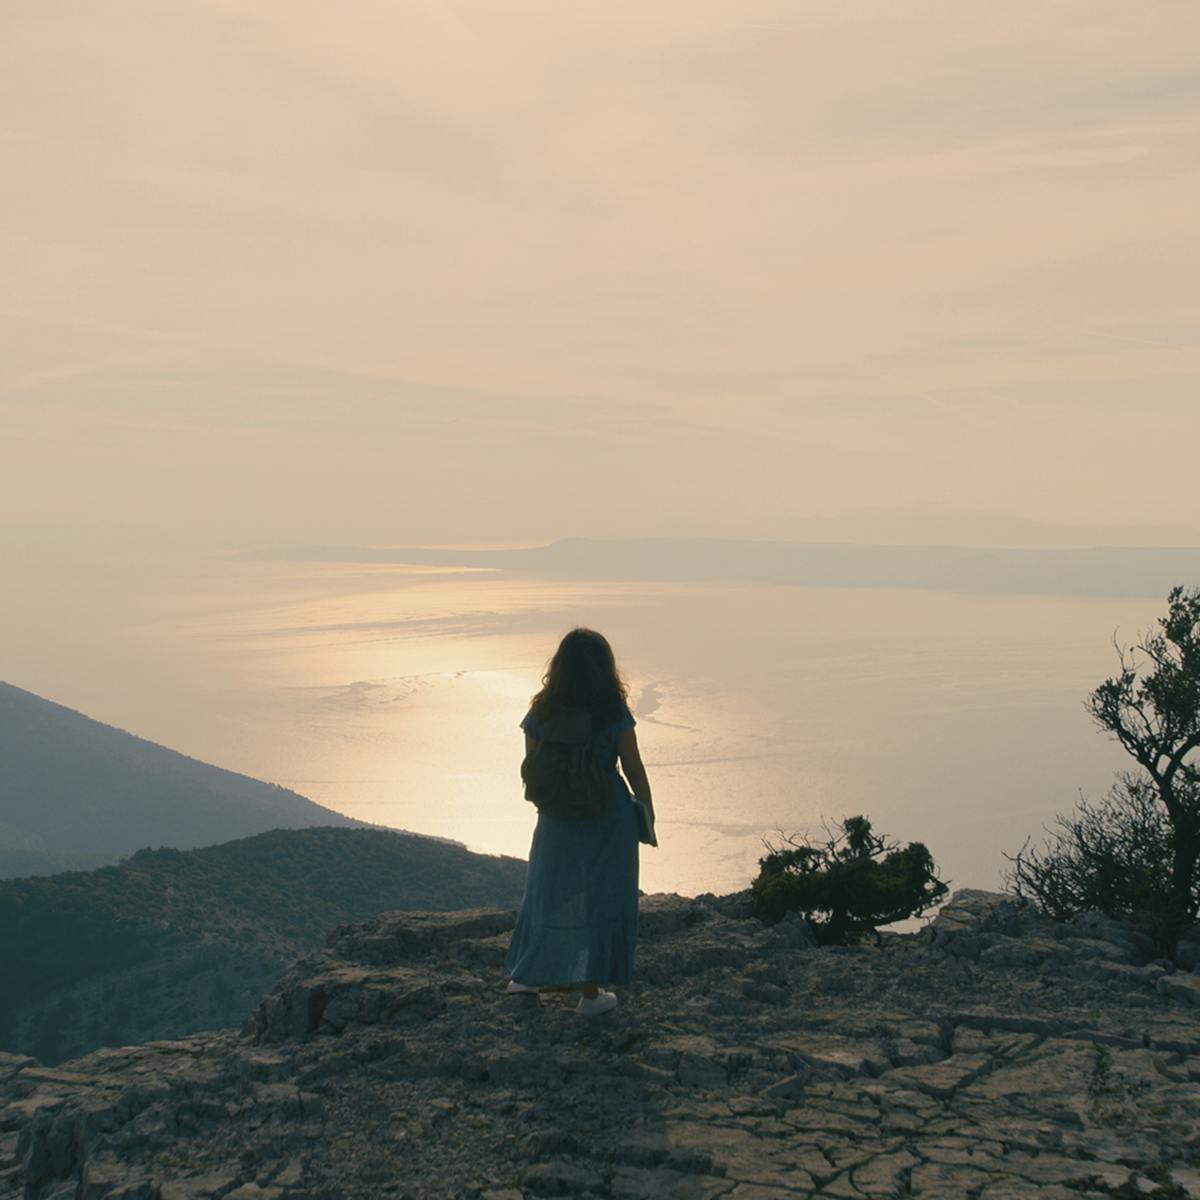 Zeynep (Naomi Krauss) stands on a cliff’s edge overlooking a beautiful sun setting on the still water.